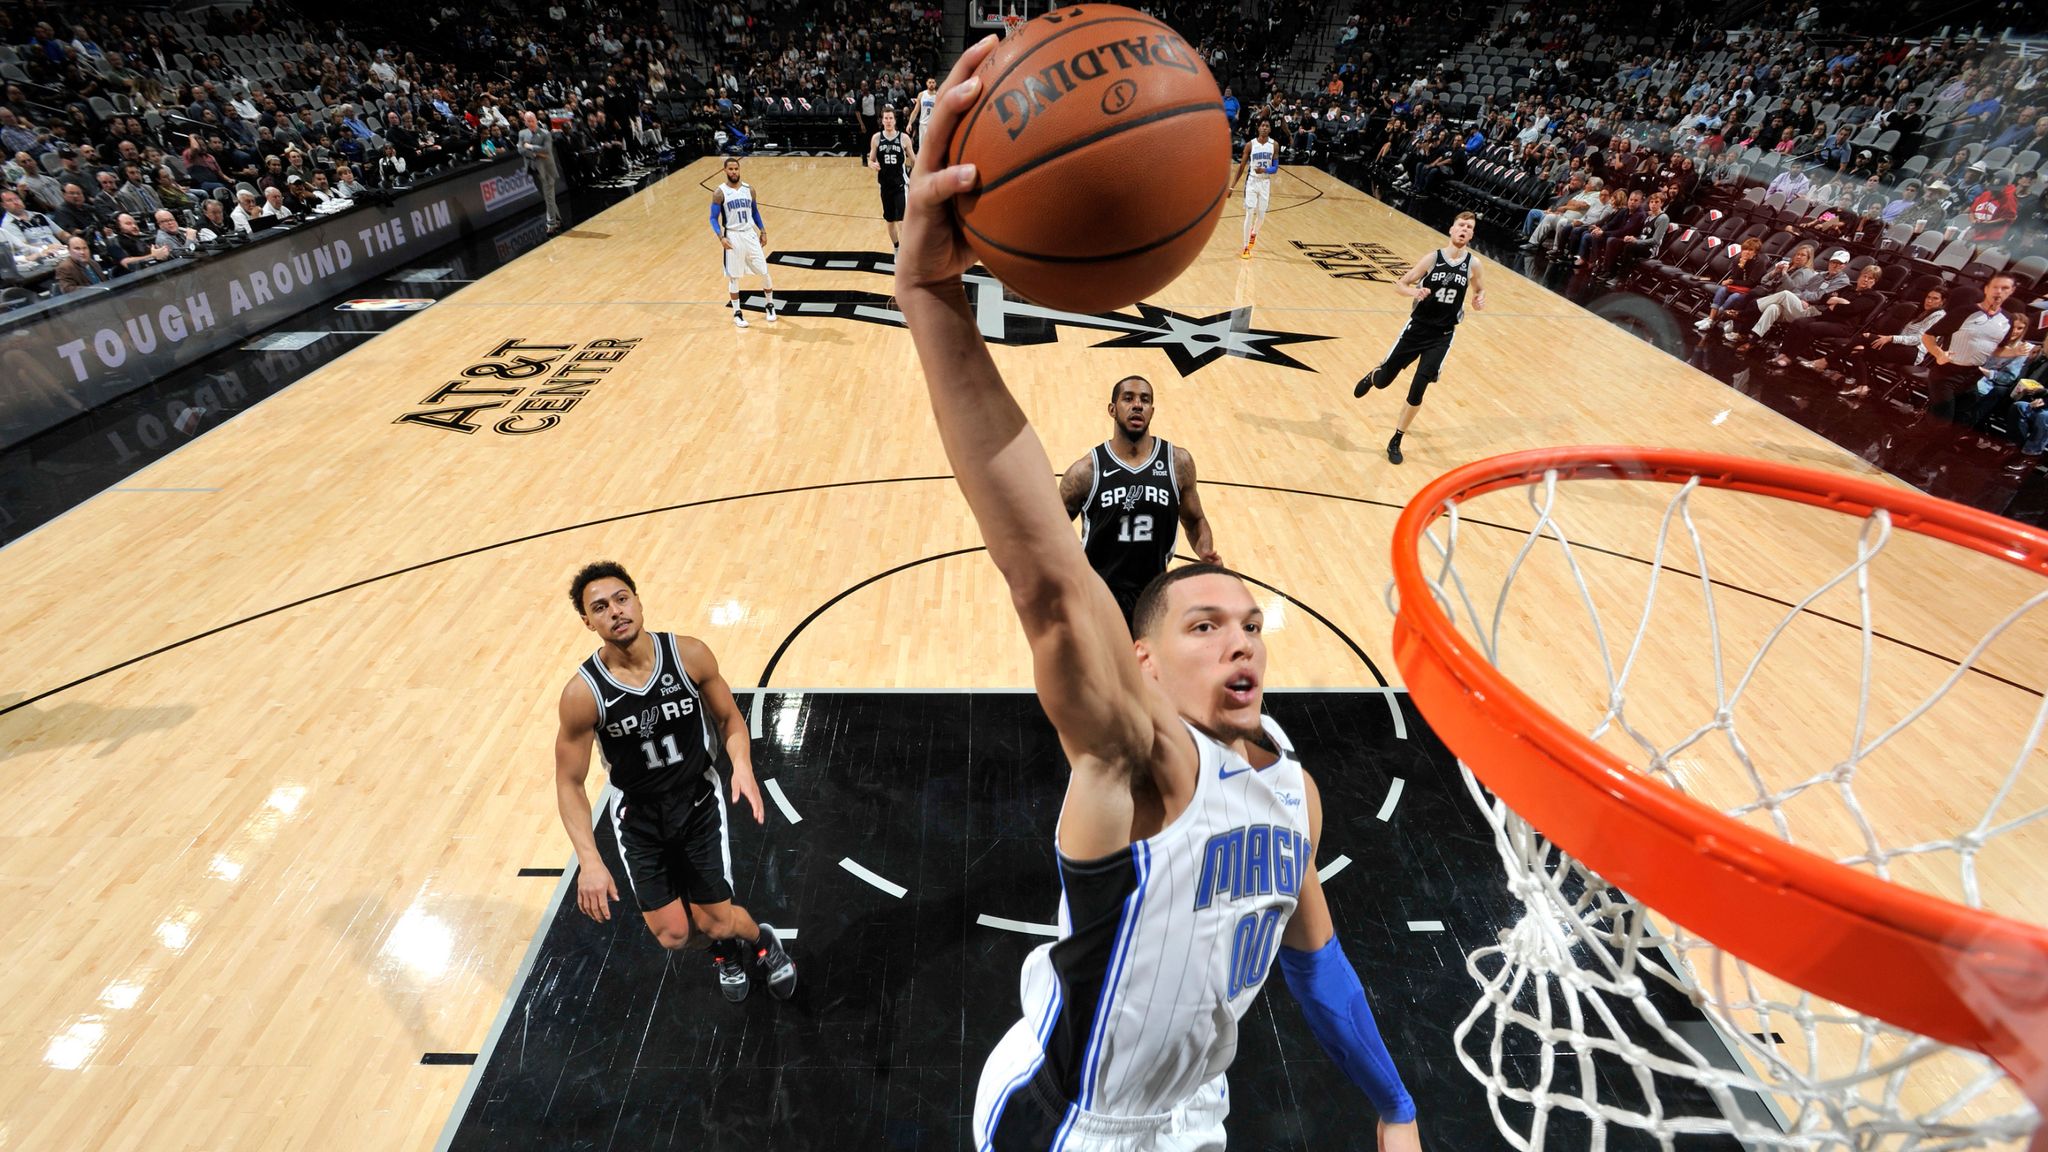 Aaron Gordon hits another game-winning 3 to beat Memphis, as the